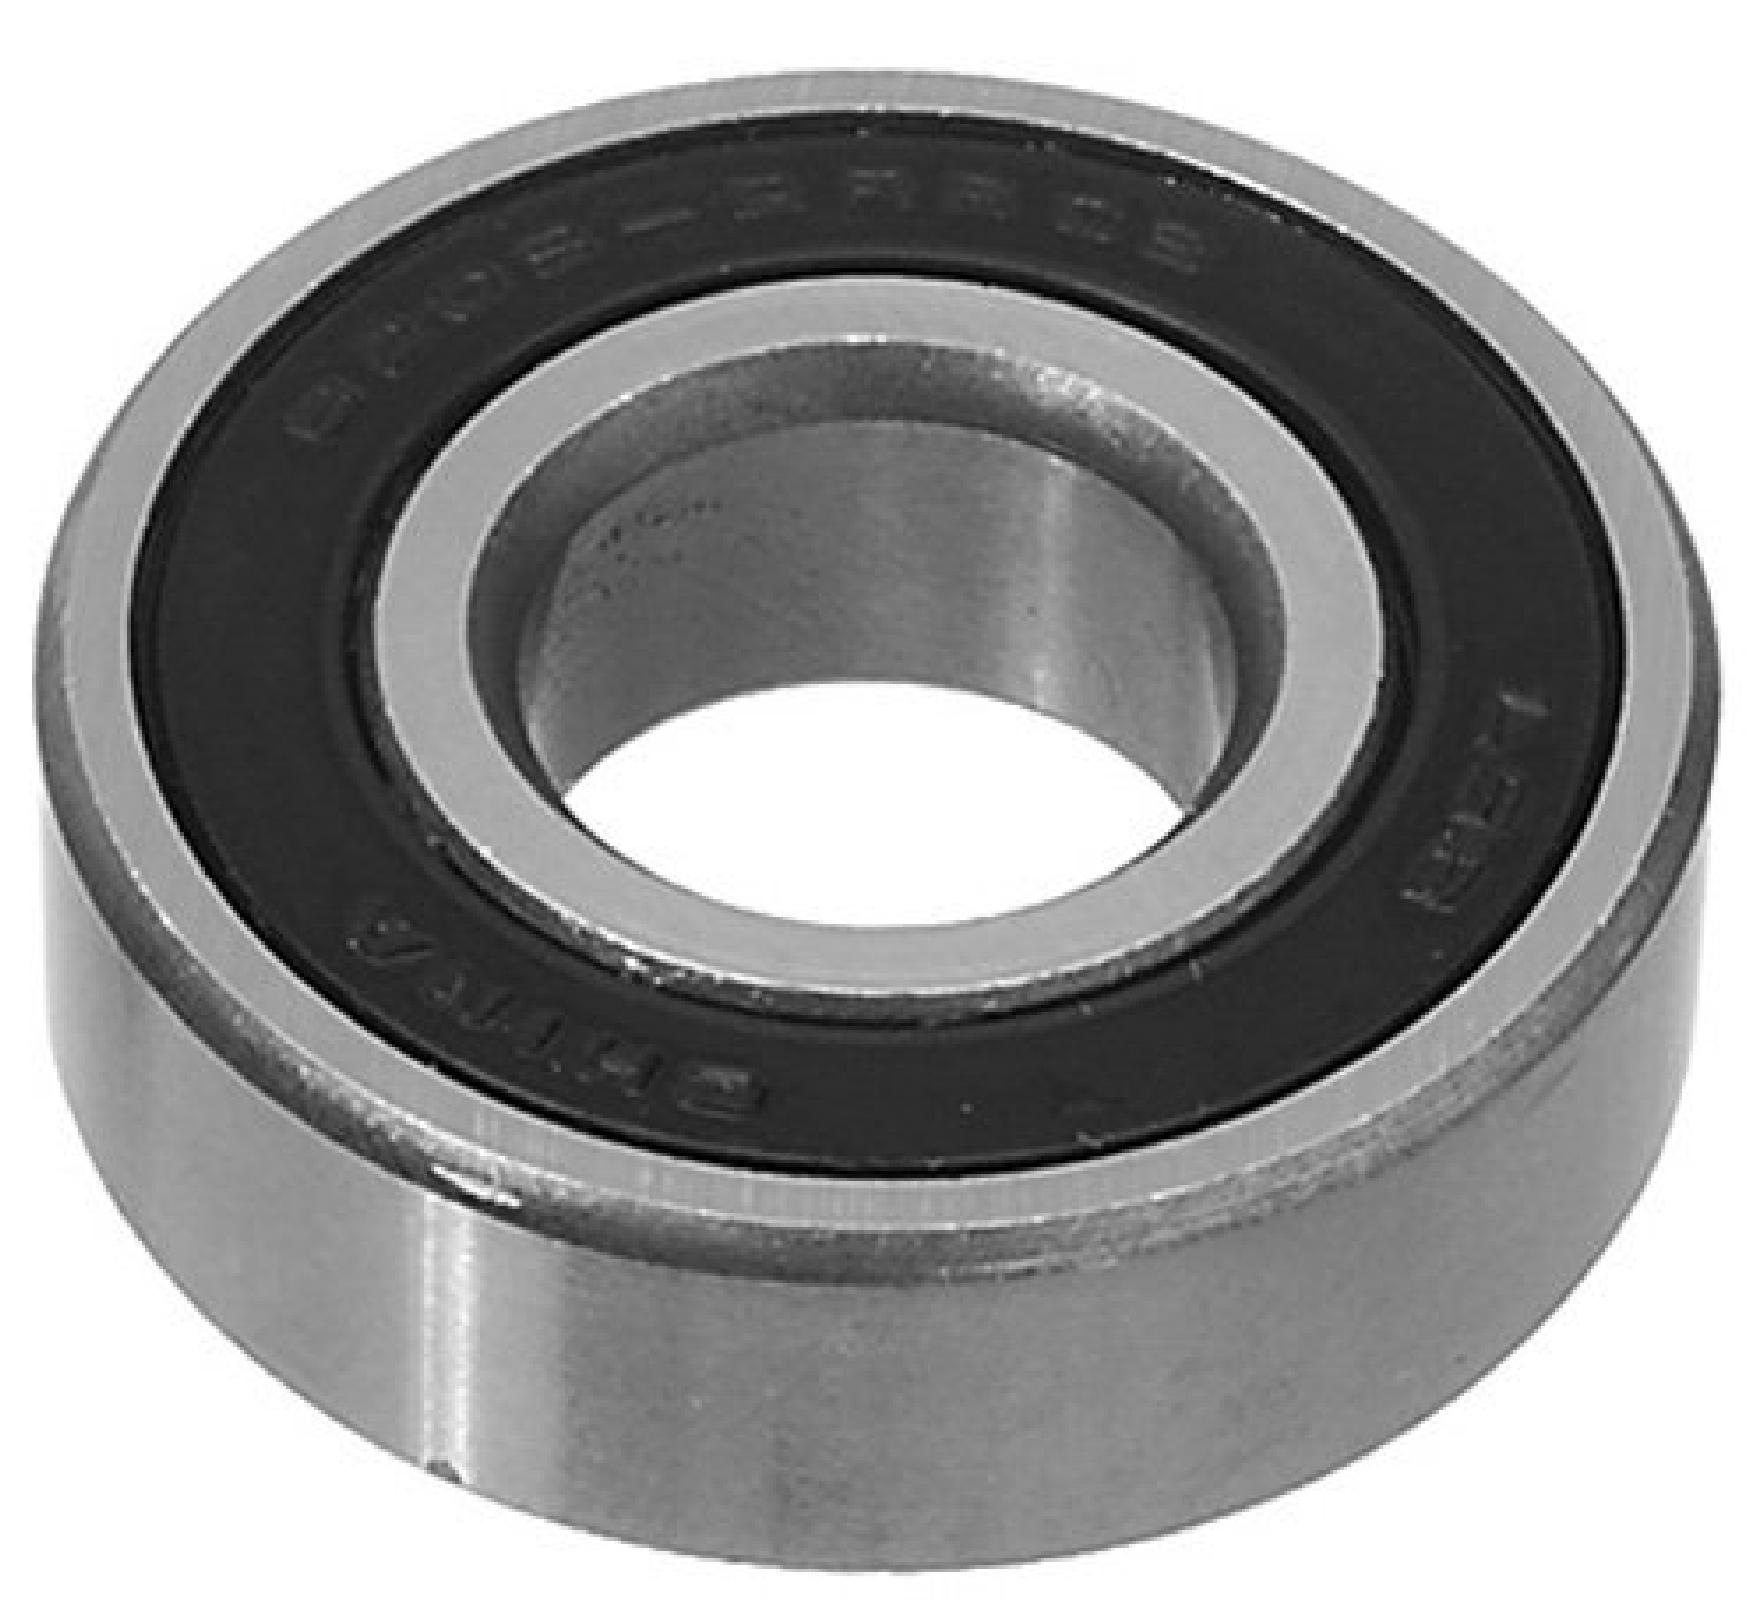 BEARING, BALL MAGNUM 6203 part# 45-257 by Oregon